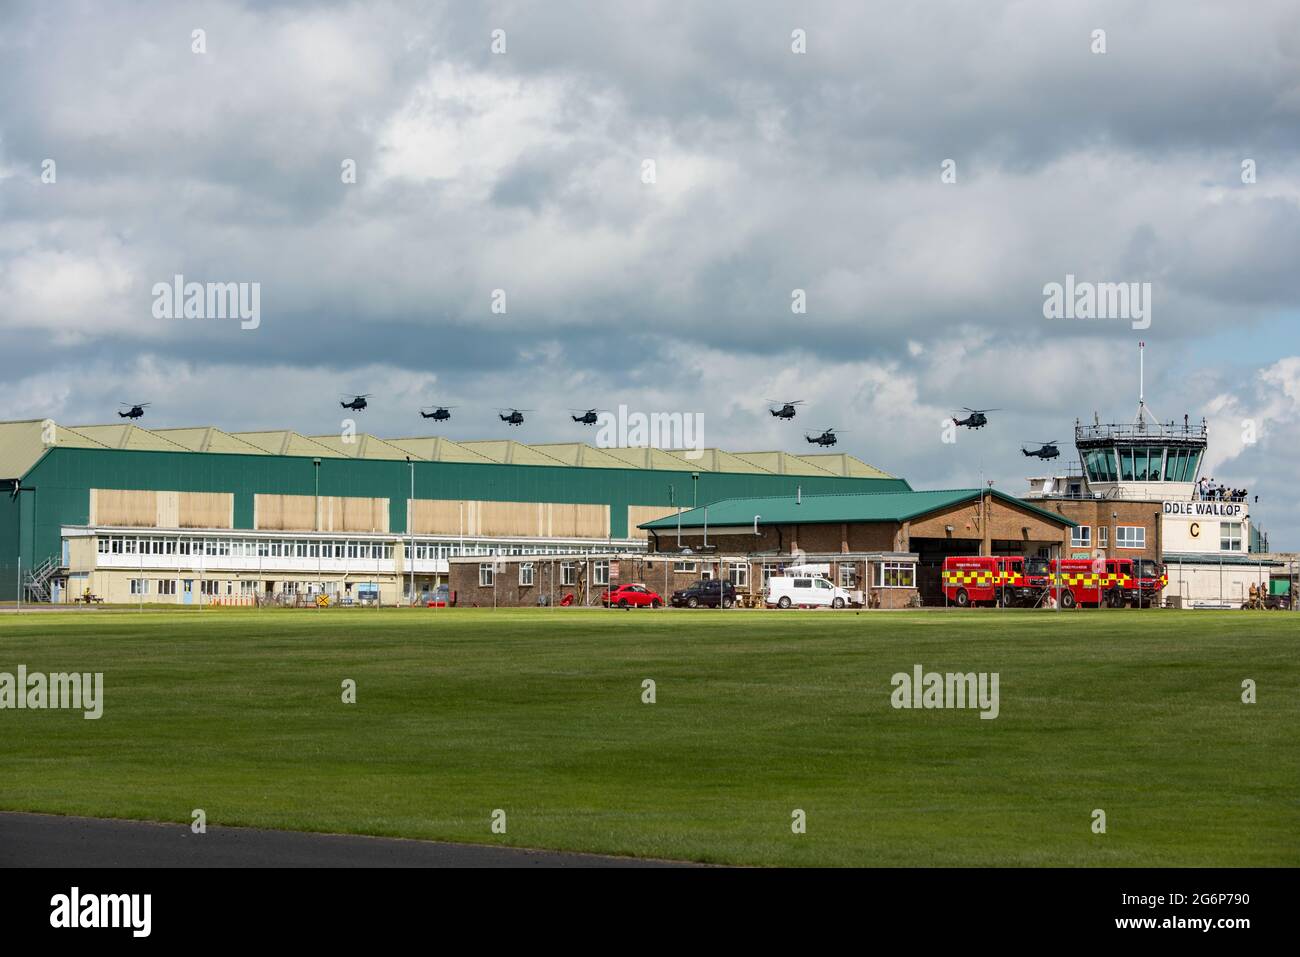 Nine RAF Puma helicopters about to land at AAC Middle Wallop, Hants during their 50th Anniversary flying tour of the UK on the 7th July 2021. Stock Photo